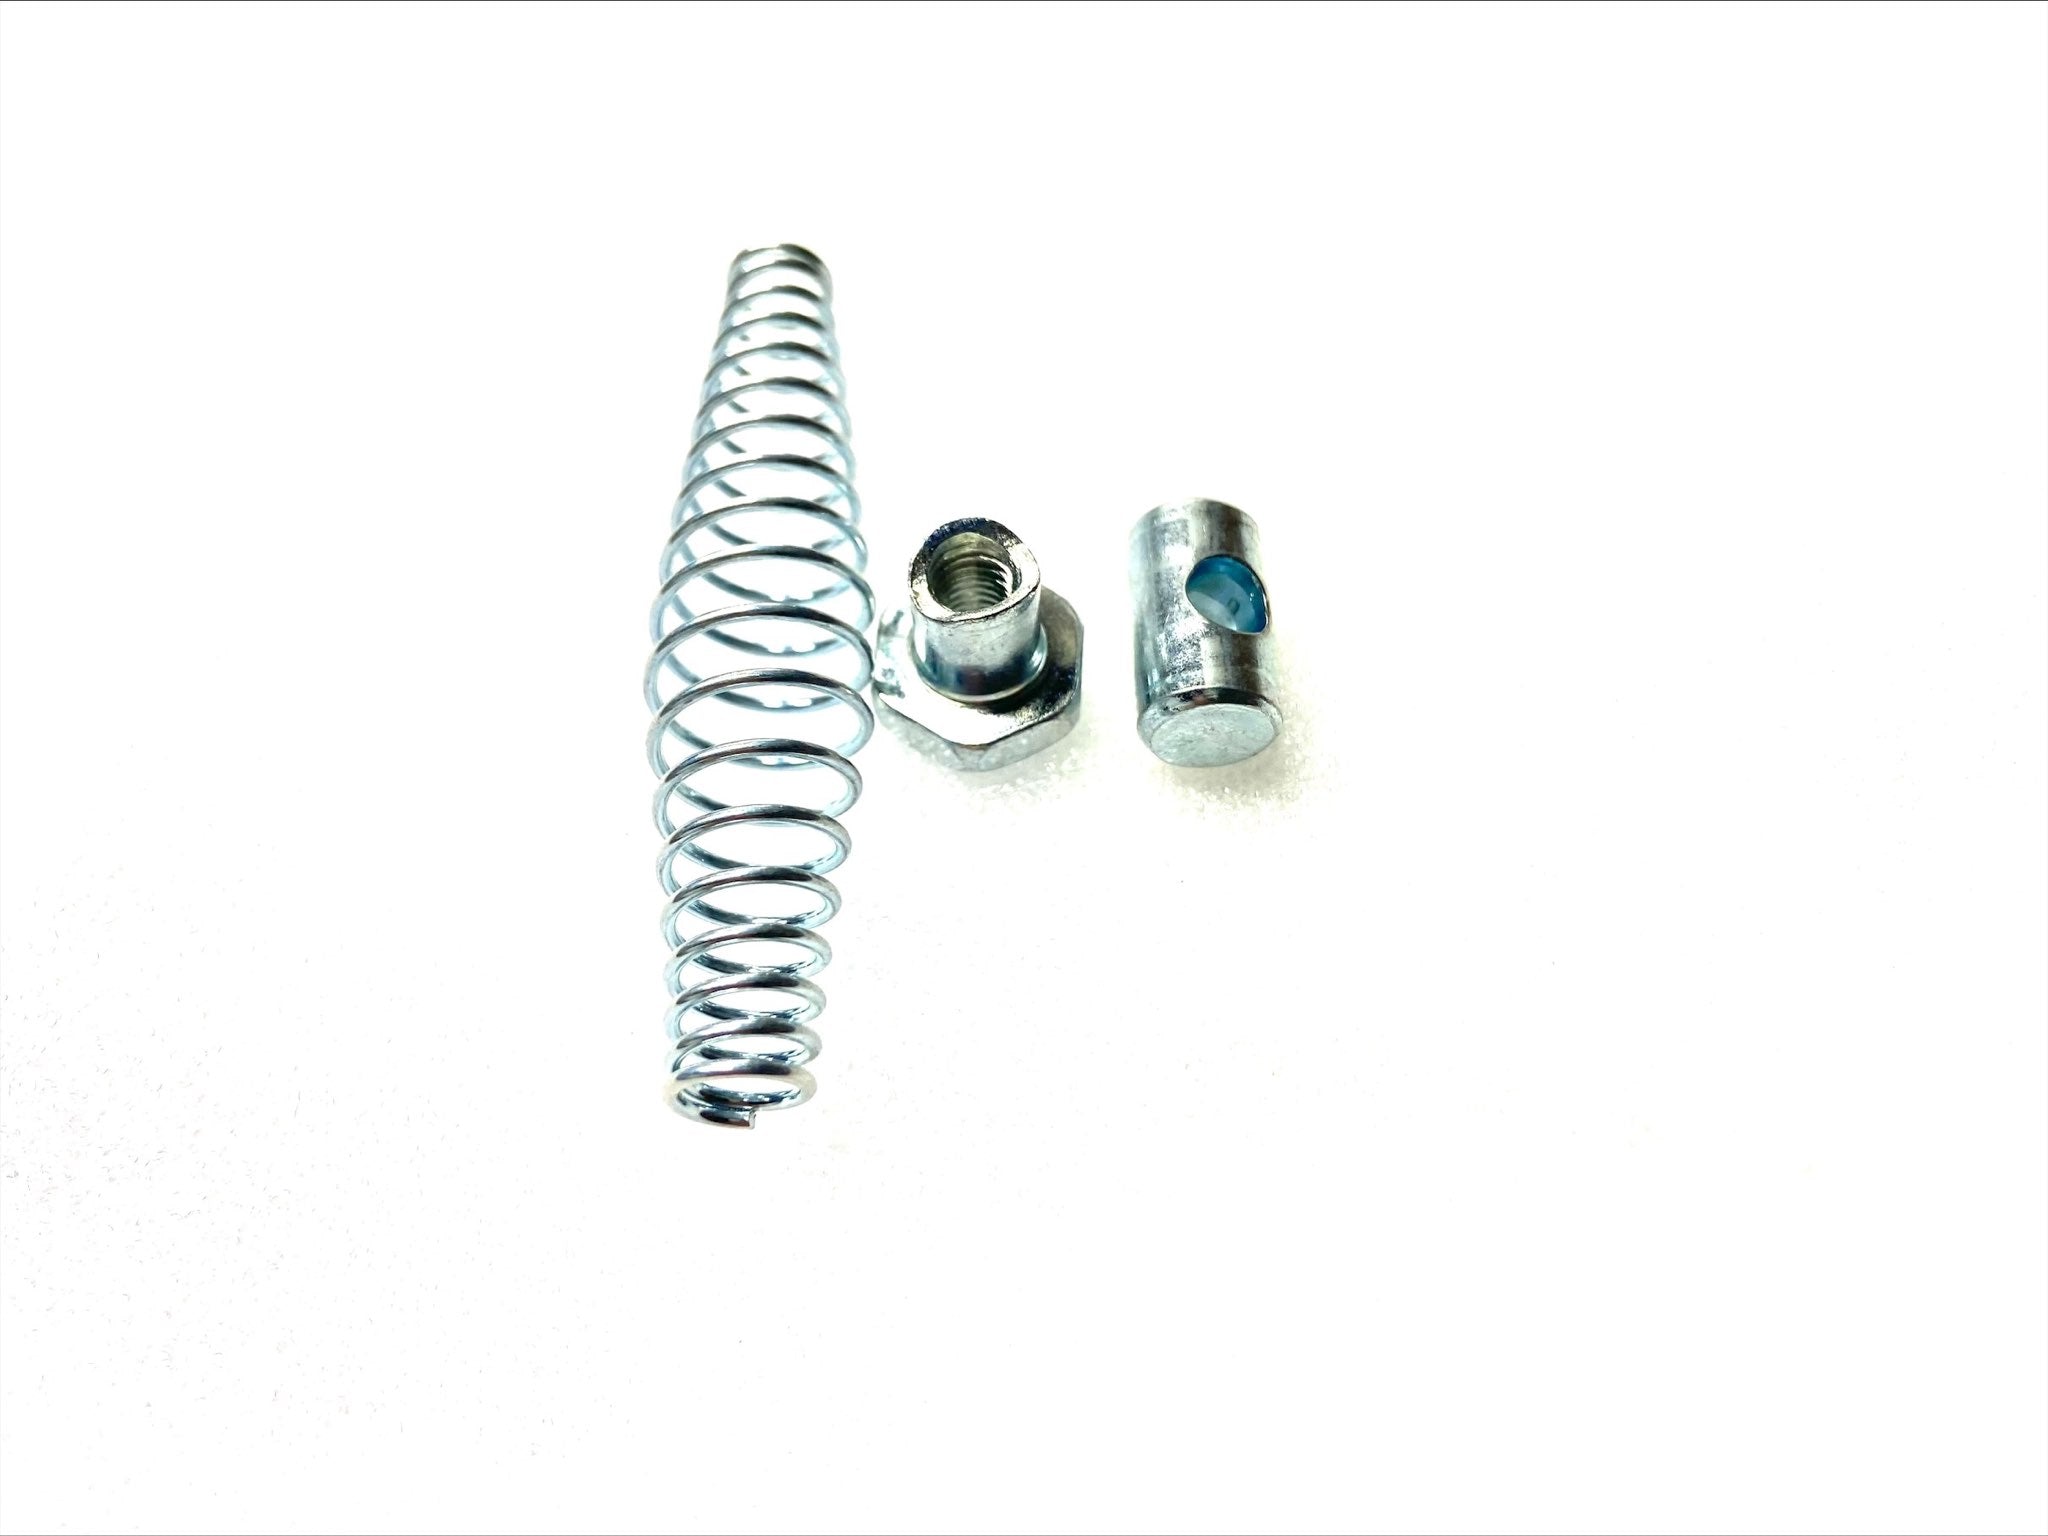 Horizon Braking Components for Threaded Cable (Spring & Screw)